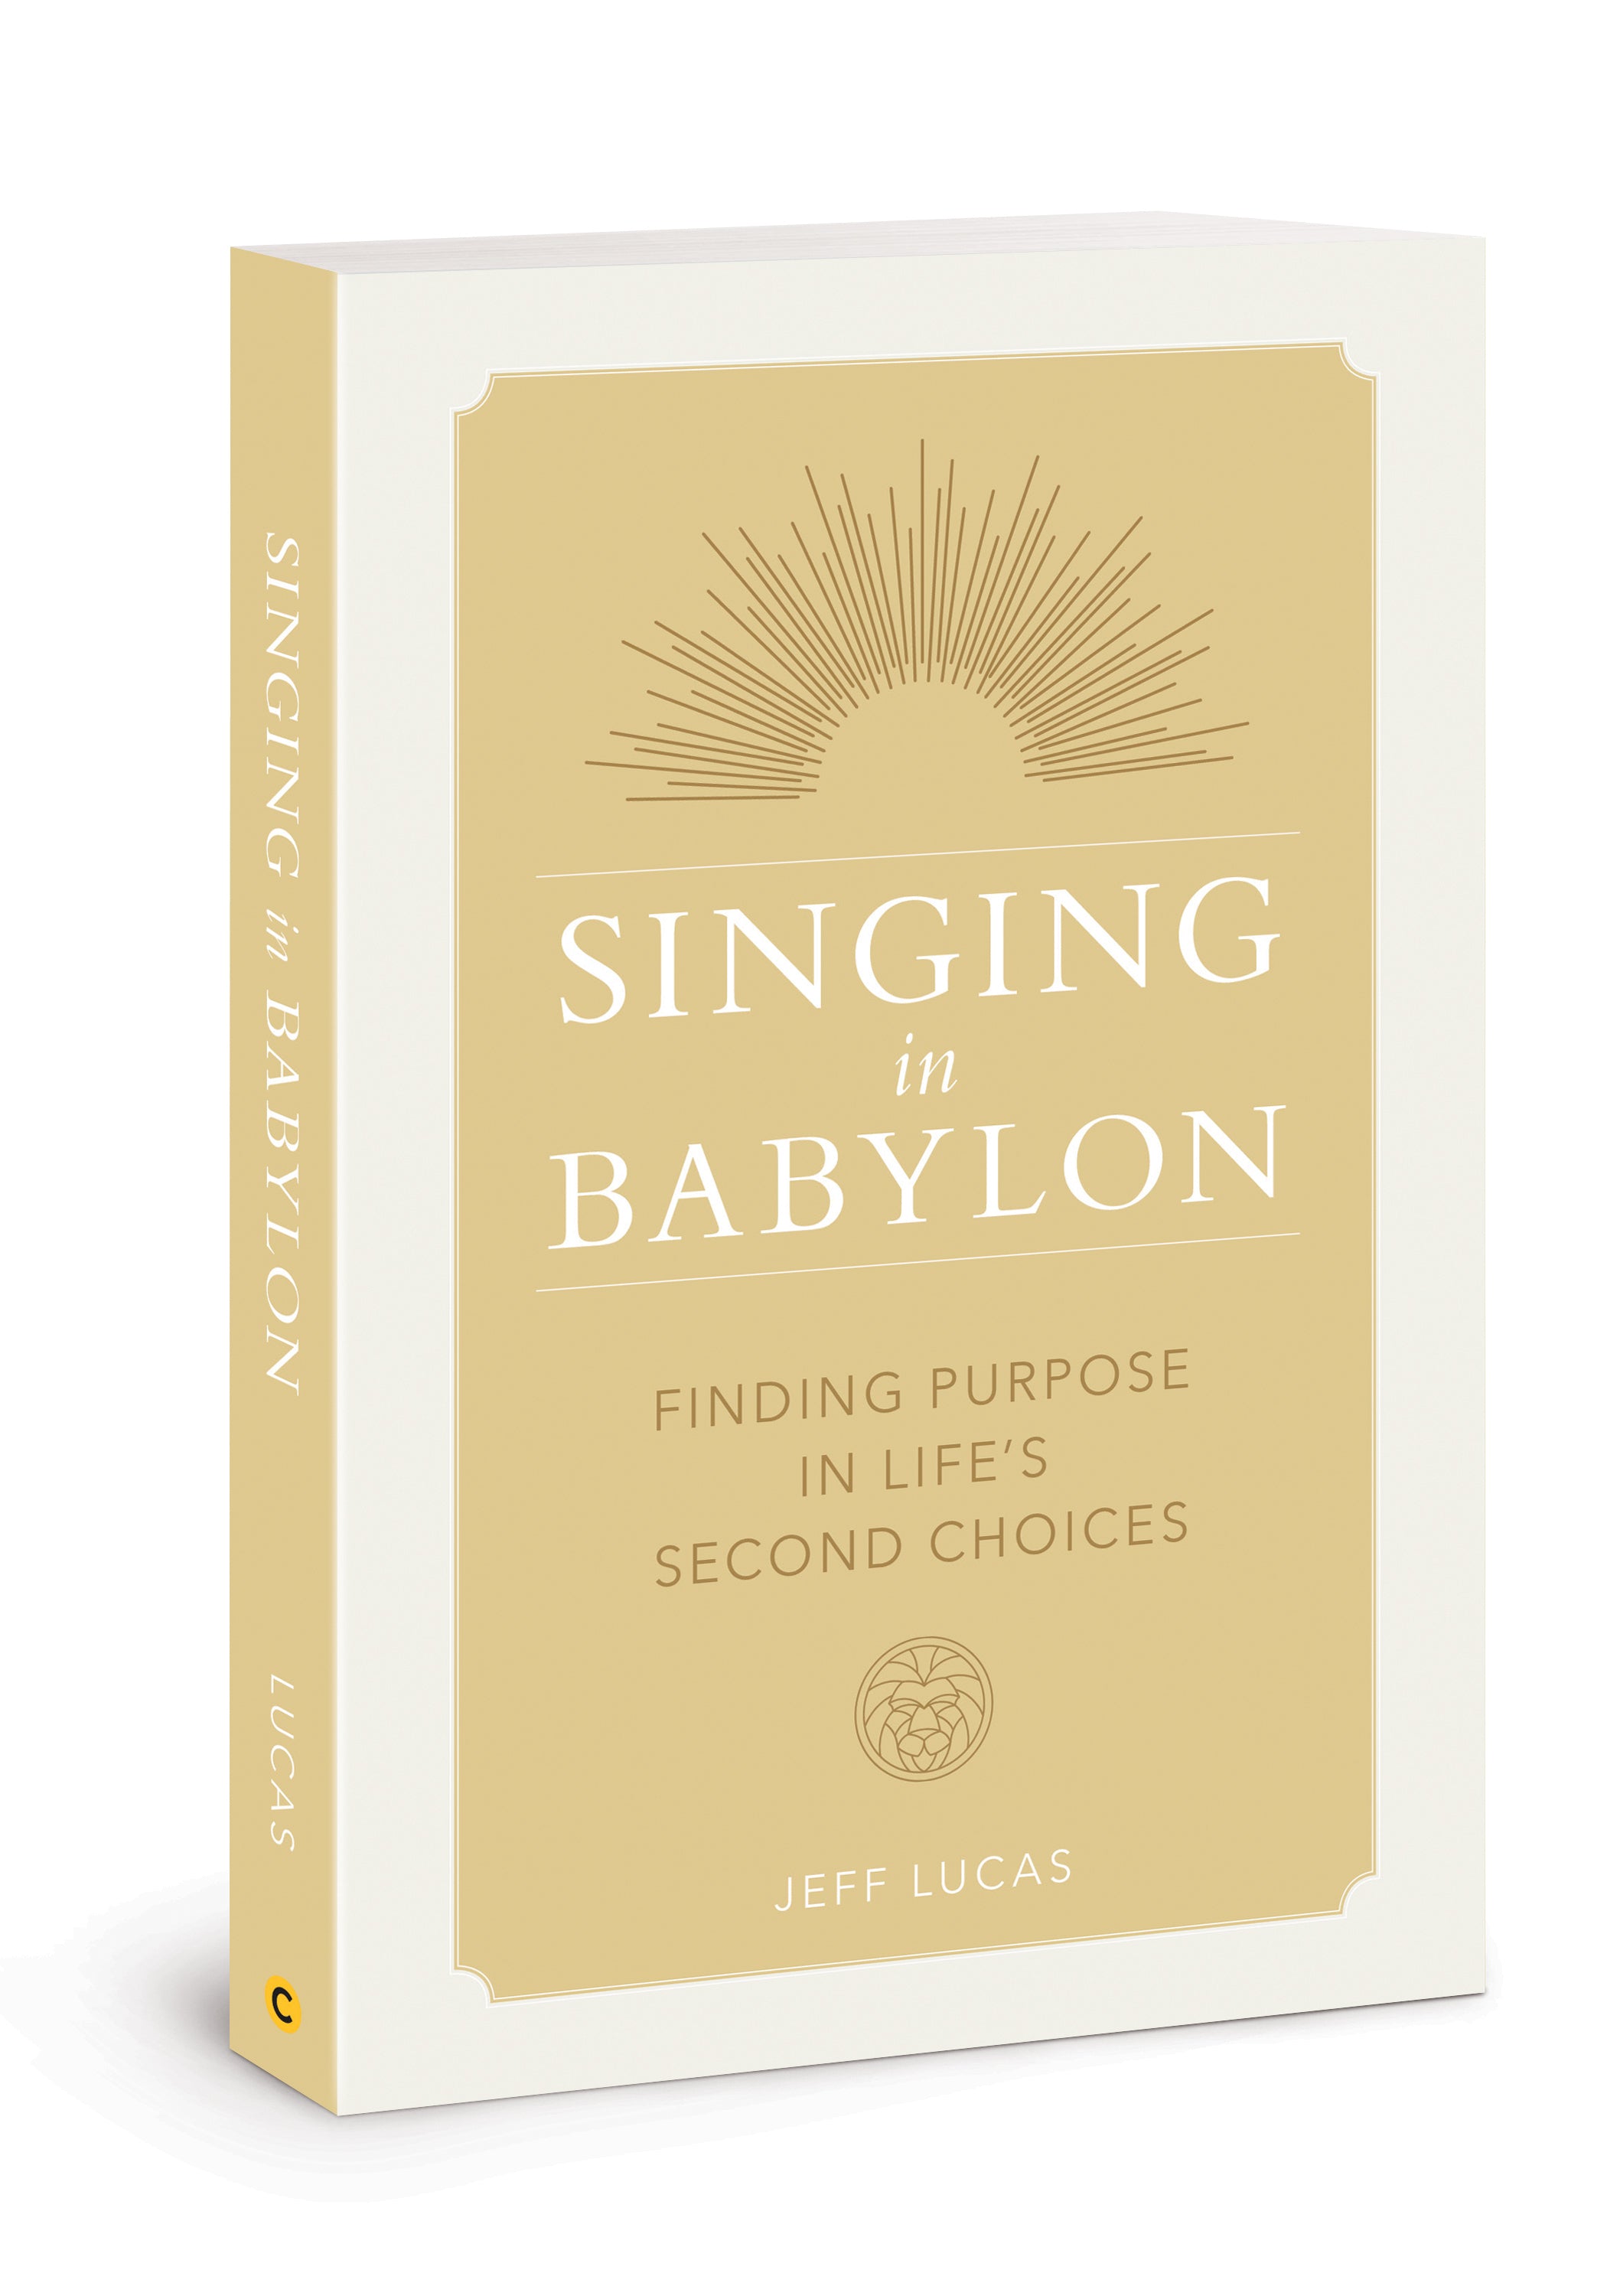 Image of Singing in Babylon other